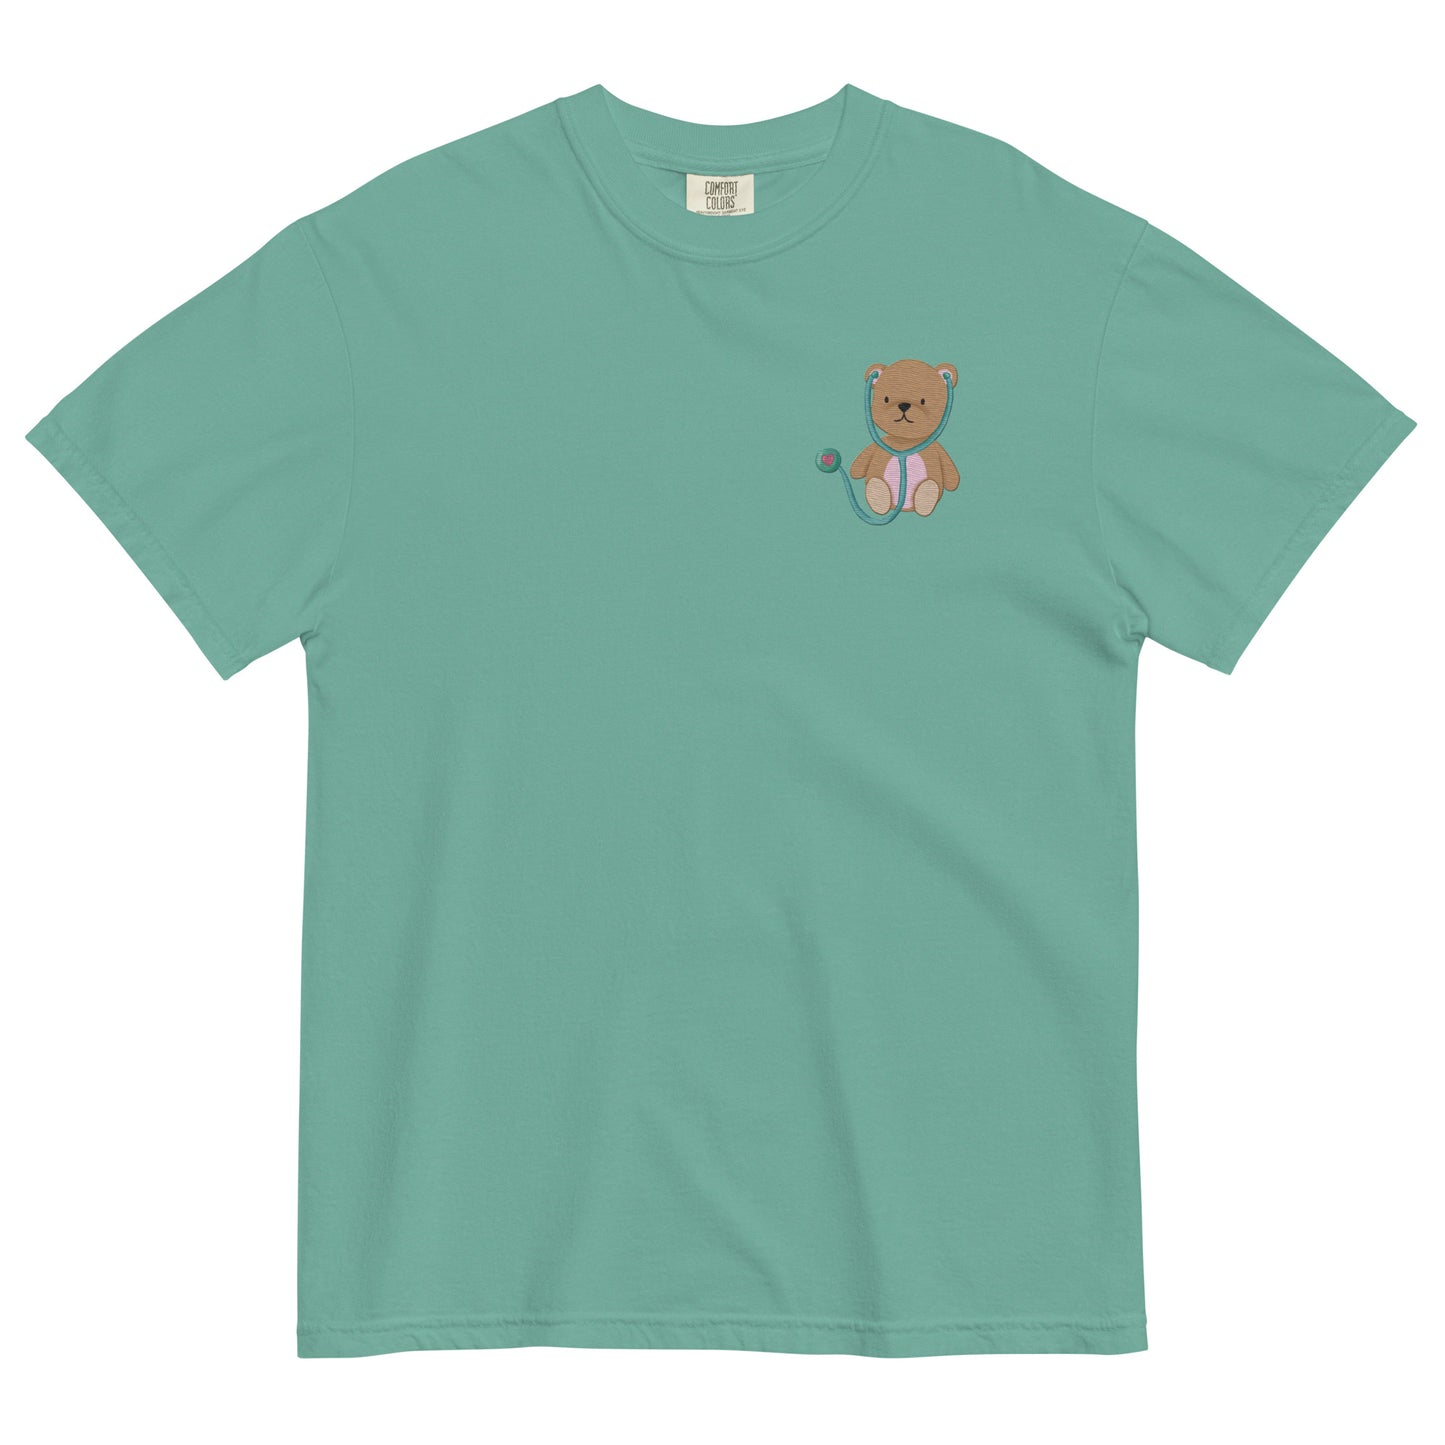 TEDDY BEAR Embroidered Unisex garment-dyed T shirt